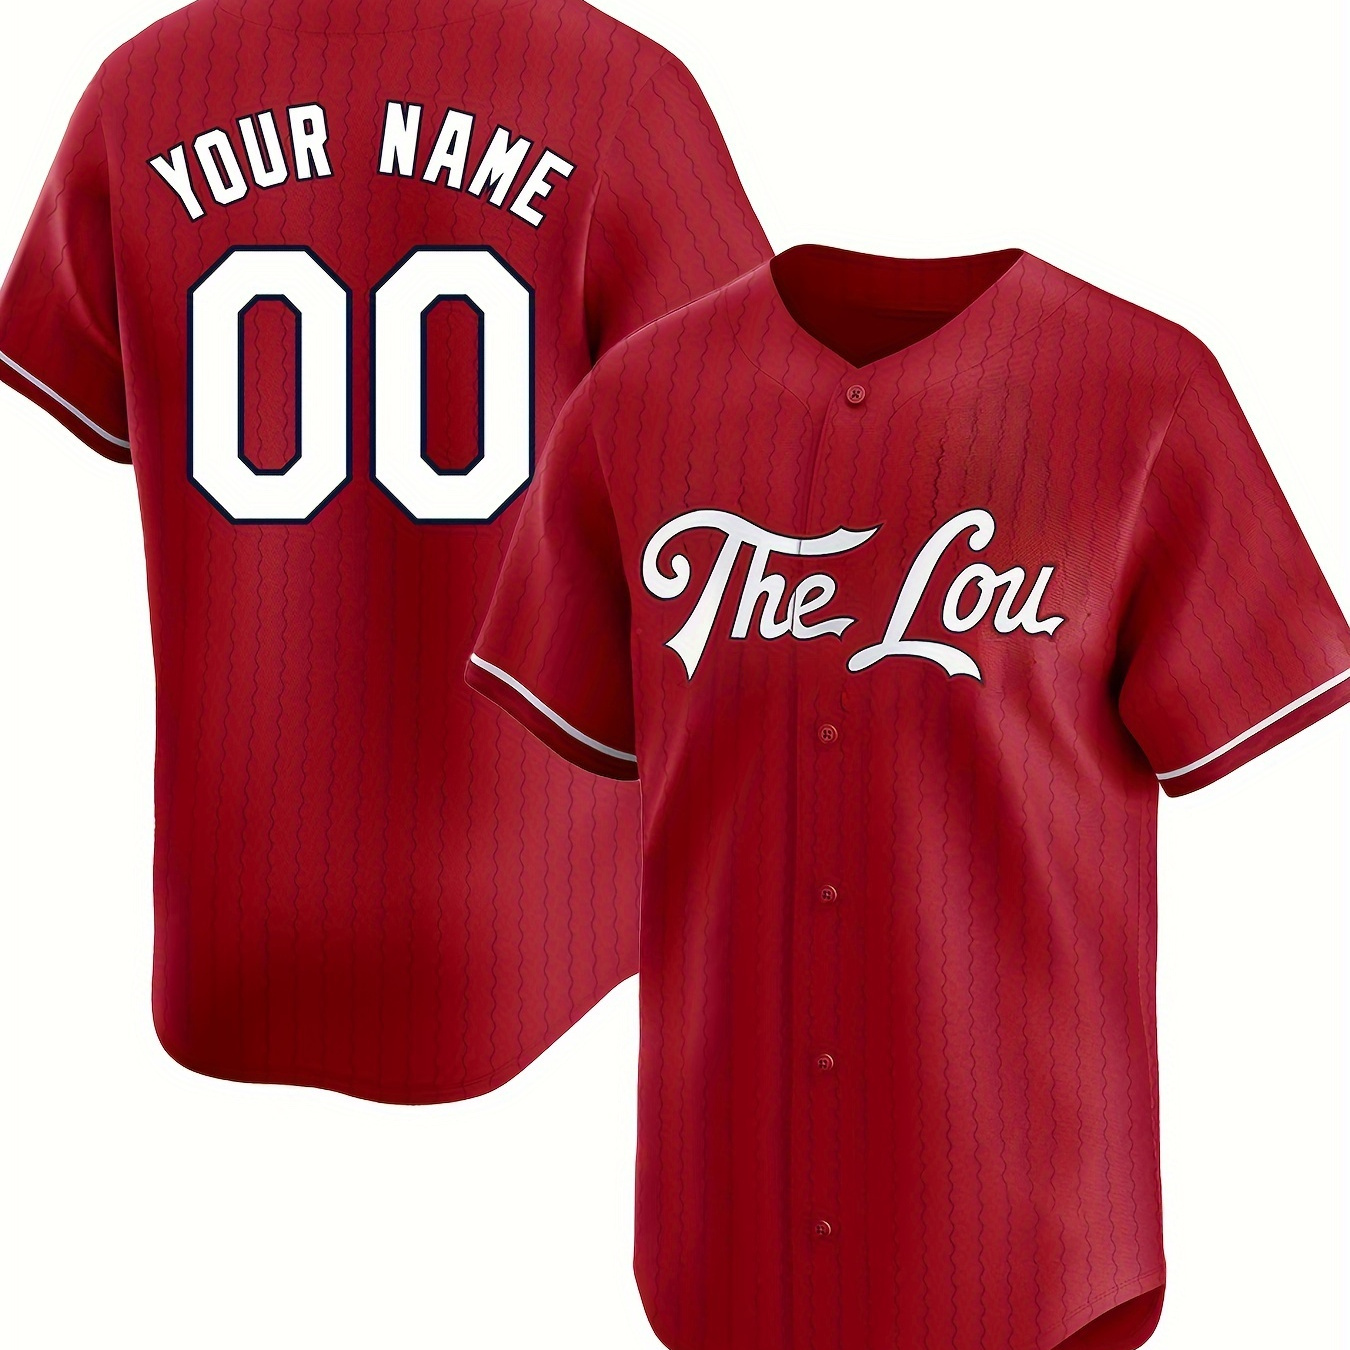 

Men's The Lou Embroidered V-neck Baseball Jersey With Customized Name And Number, Comfy Top For Summer Sport